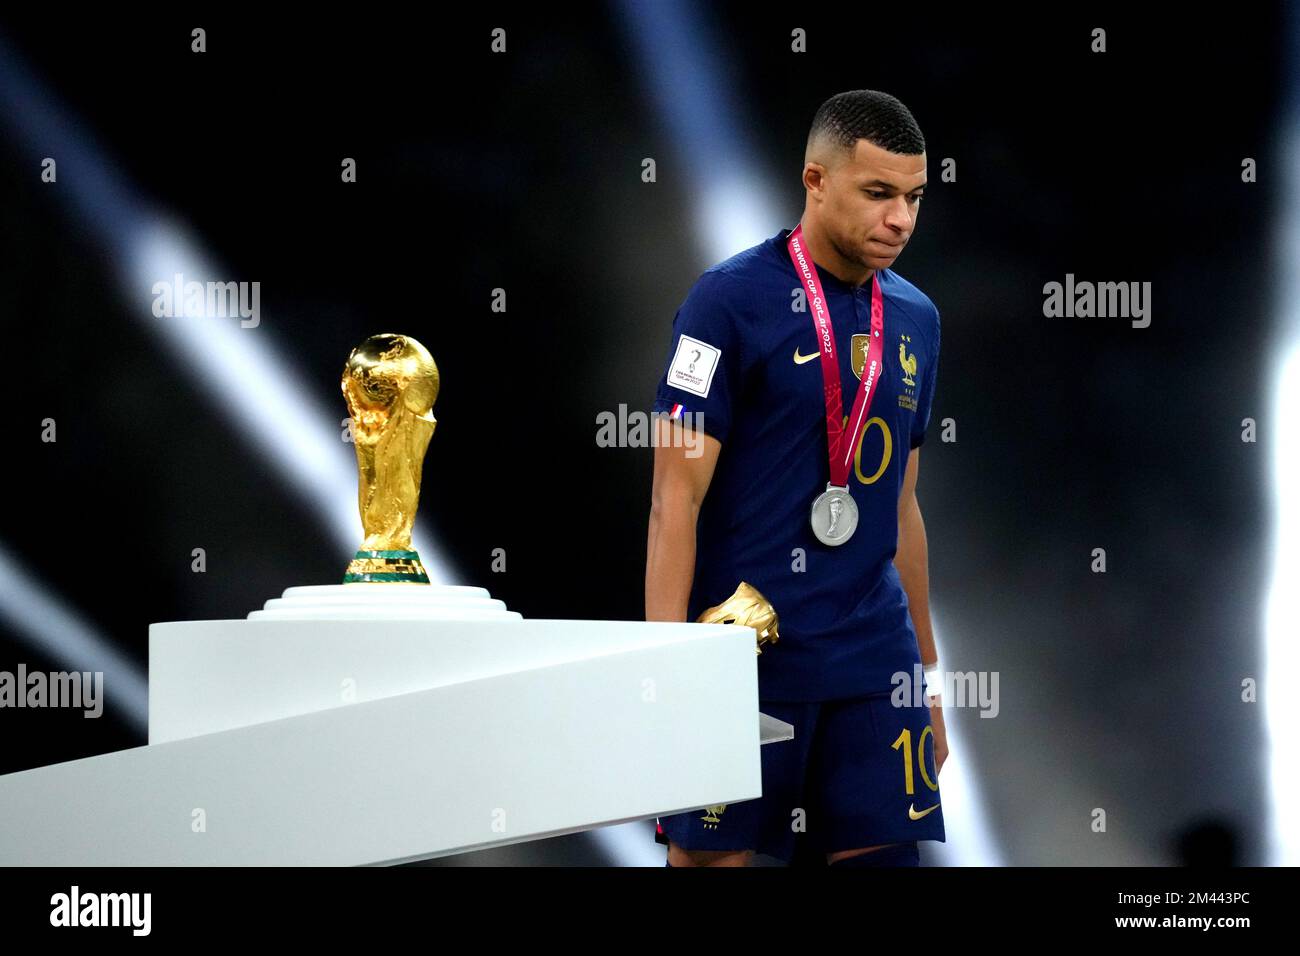 Frances Kylian Mbappe walks past the FIFA World Cup trophy after being presented with his second place medal following defeat in the FIFA World Cup final at Lusail Stadium, Qatar